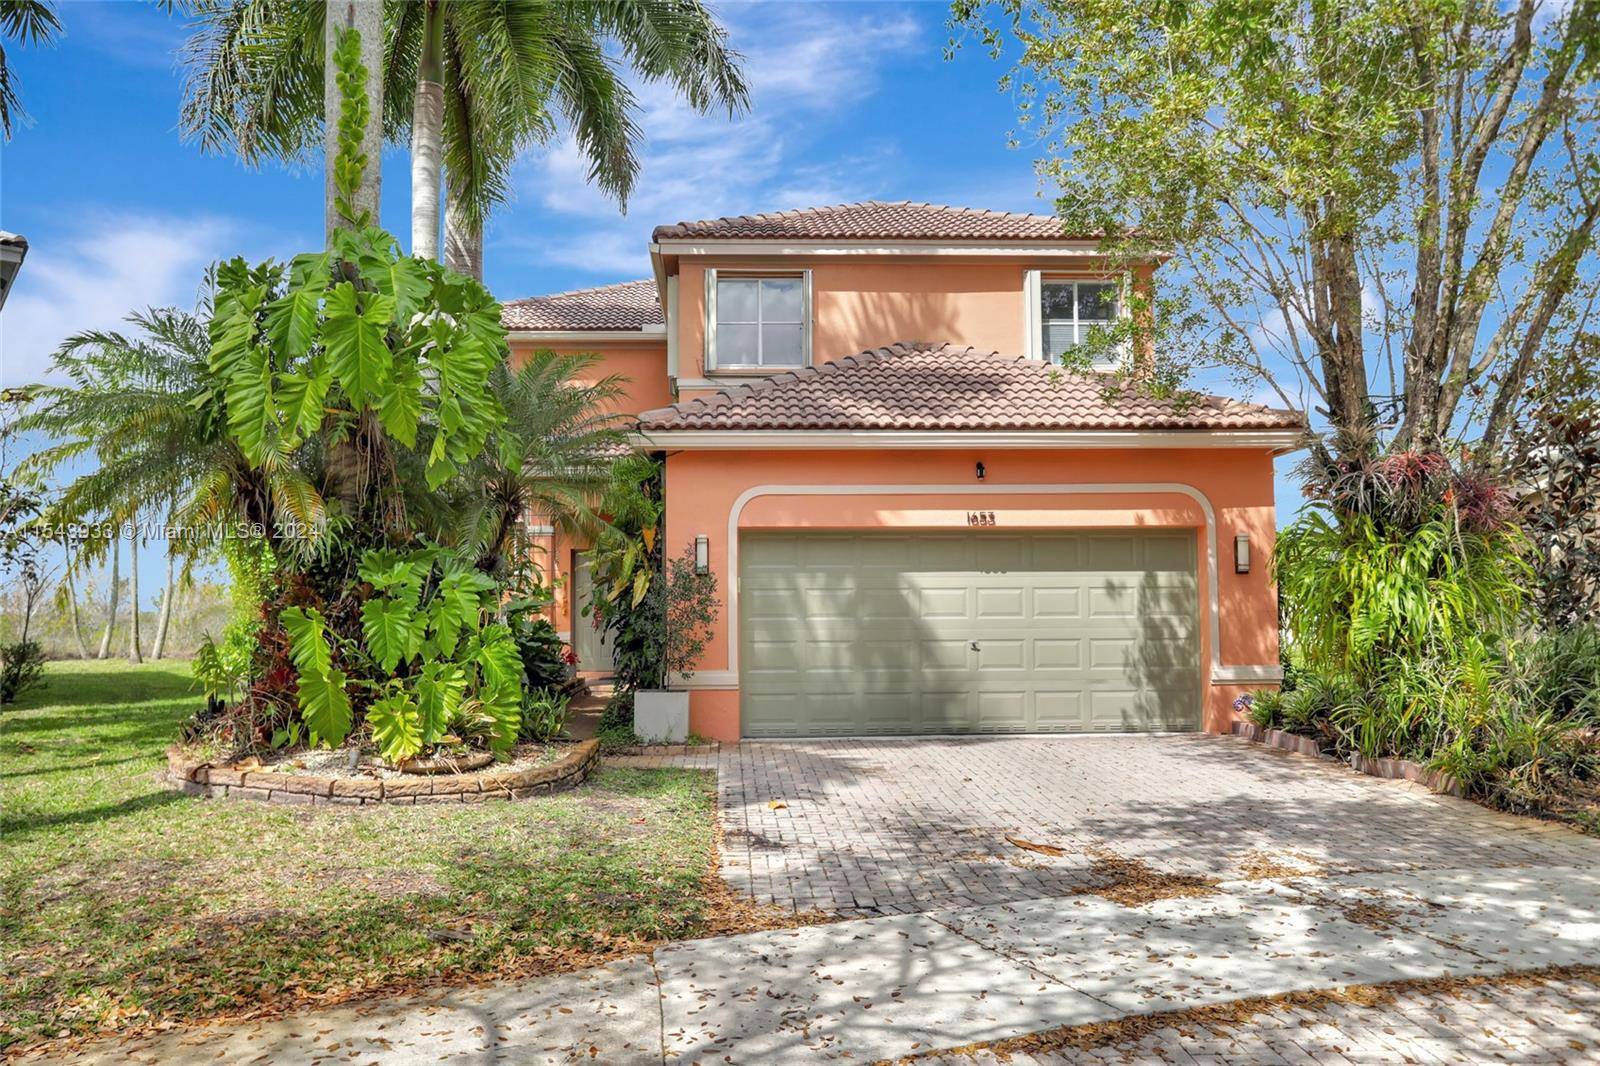 Experience luxury living in this stunning five bedroom home, complete with a heated pool and spa, surrounded by breathtaking views of the Everglades !